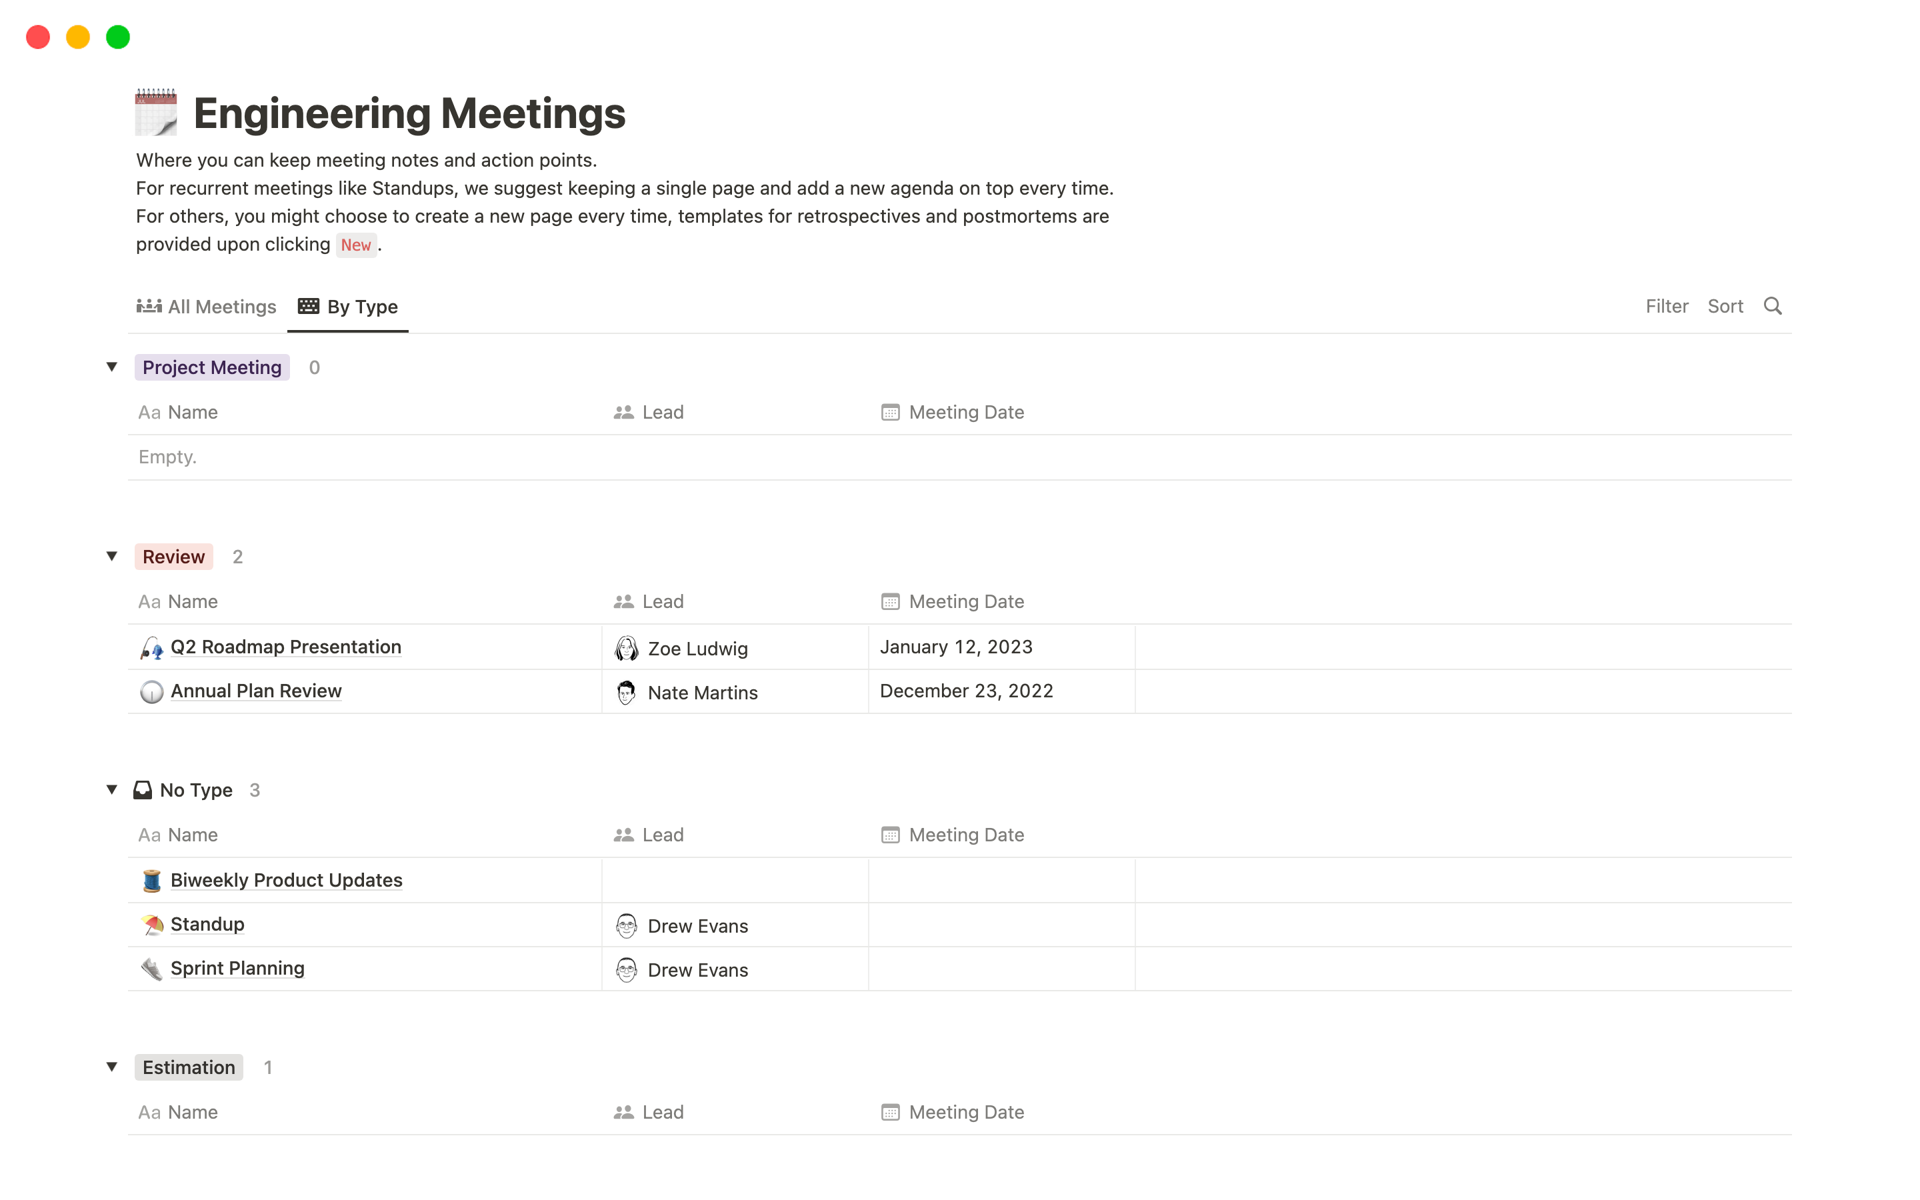 All-in-one set of templates for all your engineering meeting needs.